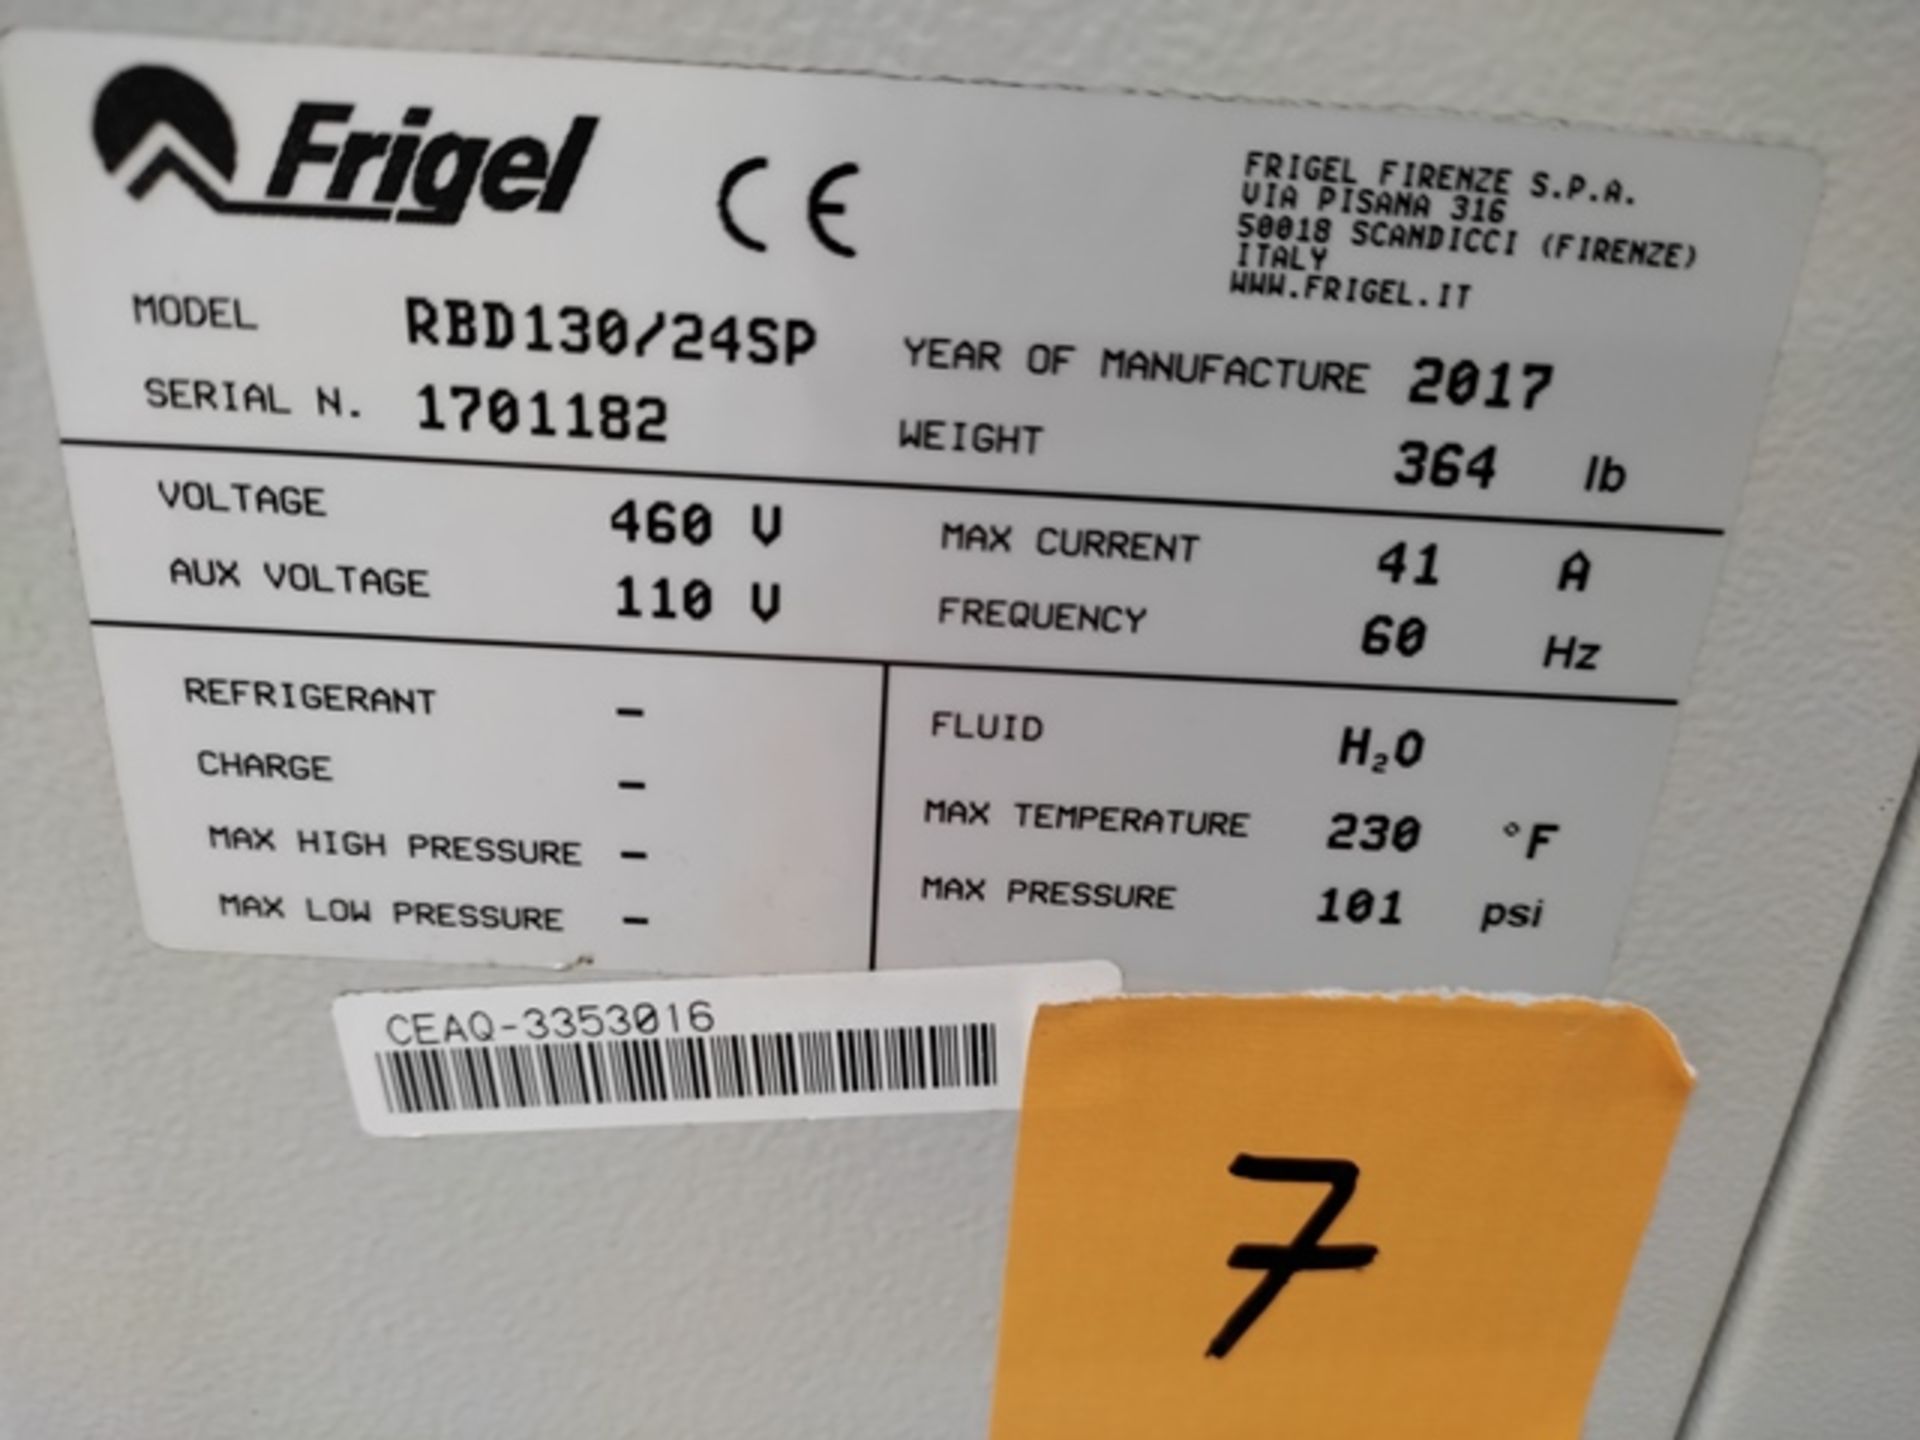 Lot of: (2) Frigel RBD130/24 SP 24 KW Flow Booster Temperature Controllers, Mfg. Year: 2017 - Image 10 of 10